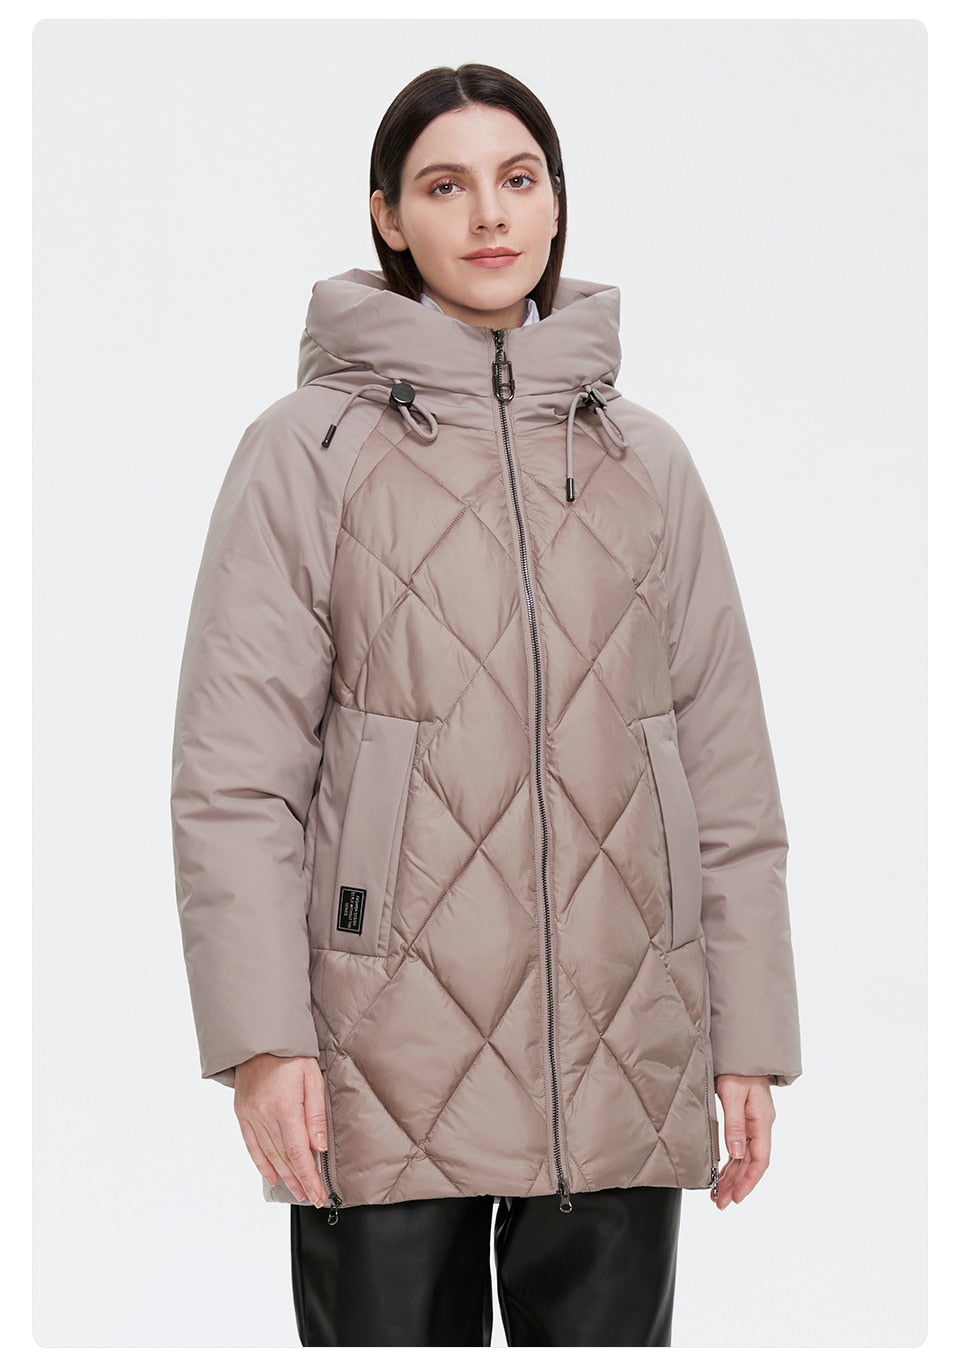 Petite puffer jacket with stand-up collar